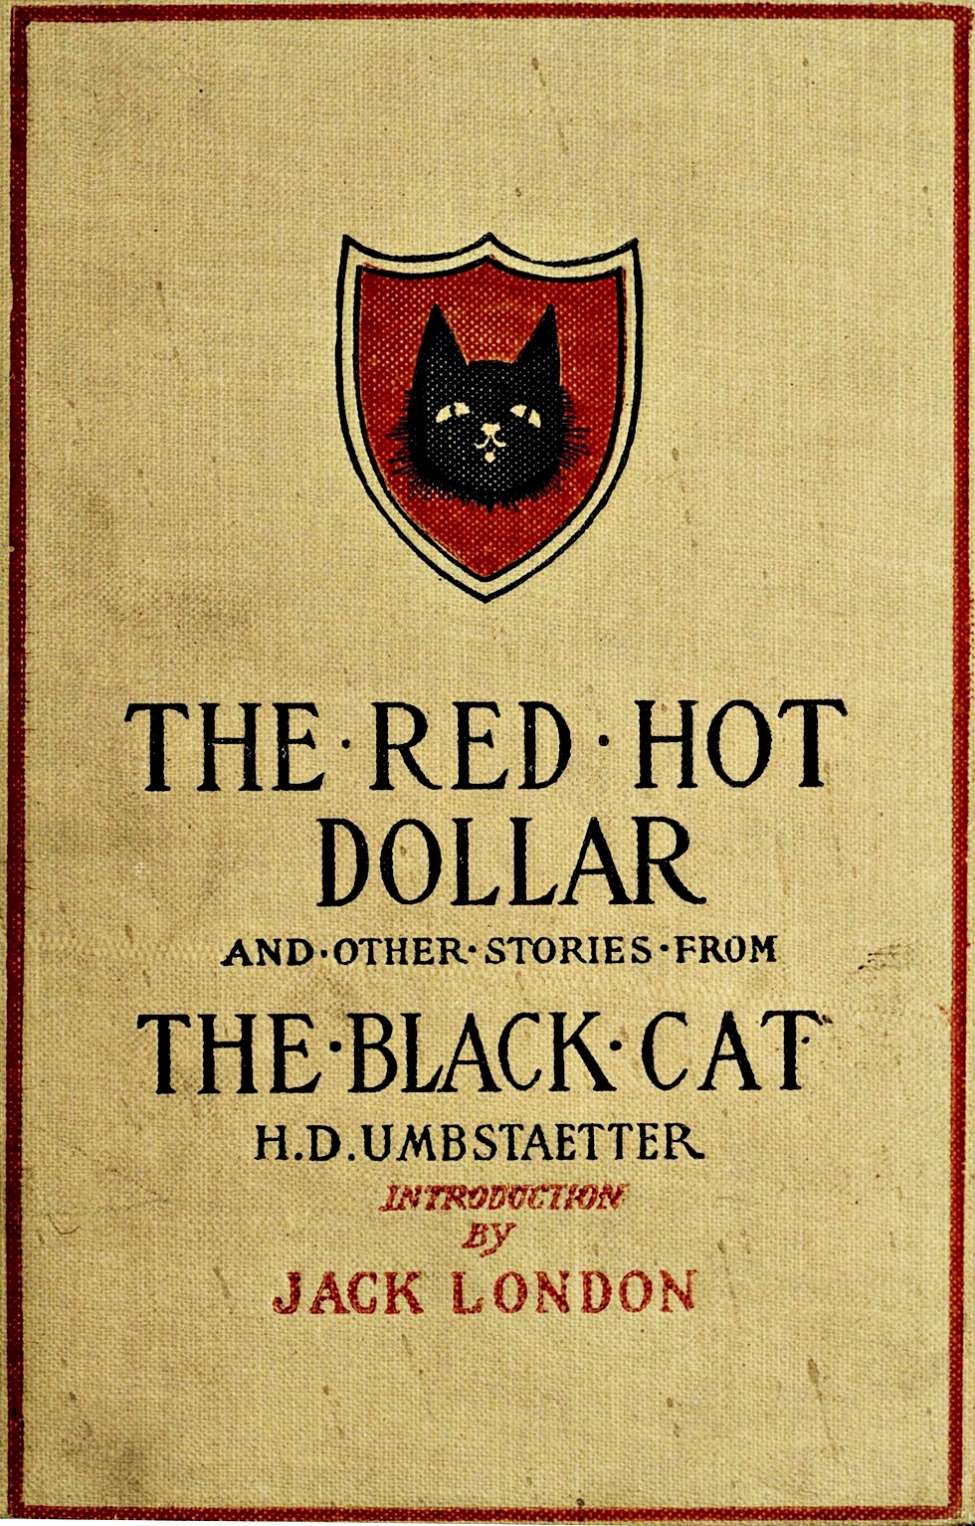 Comic Book Cover For The Red Hot Dollar and other stories from The Black Cat